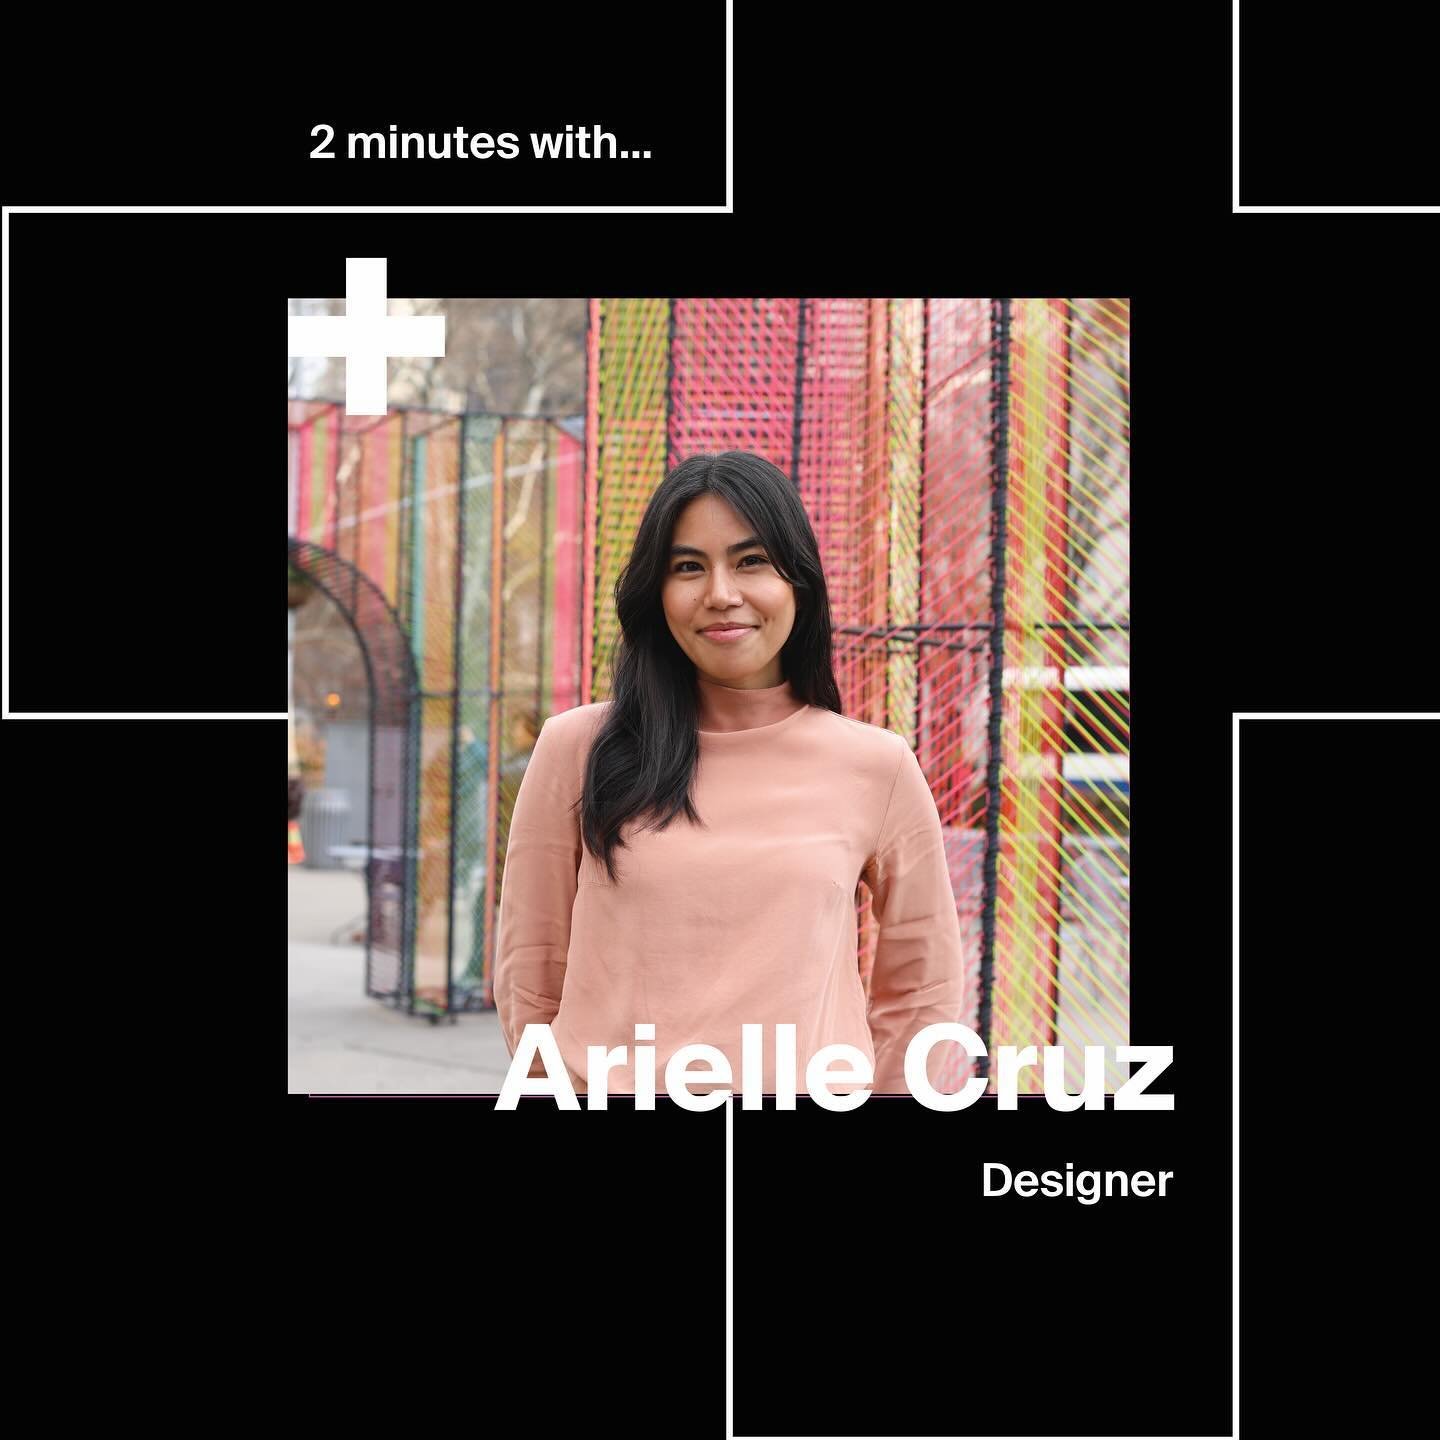 We're excited to share the next feature in our '2 minutes with...' series, meet Arielle Cruz!

#aplusi #aplusipeople